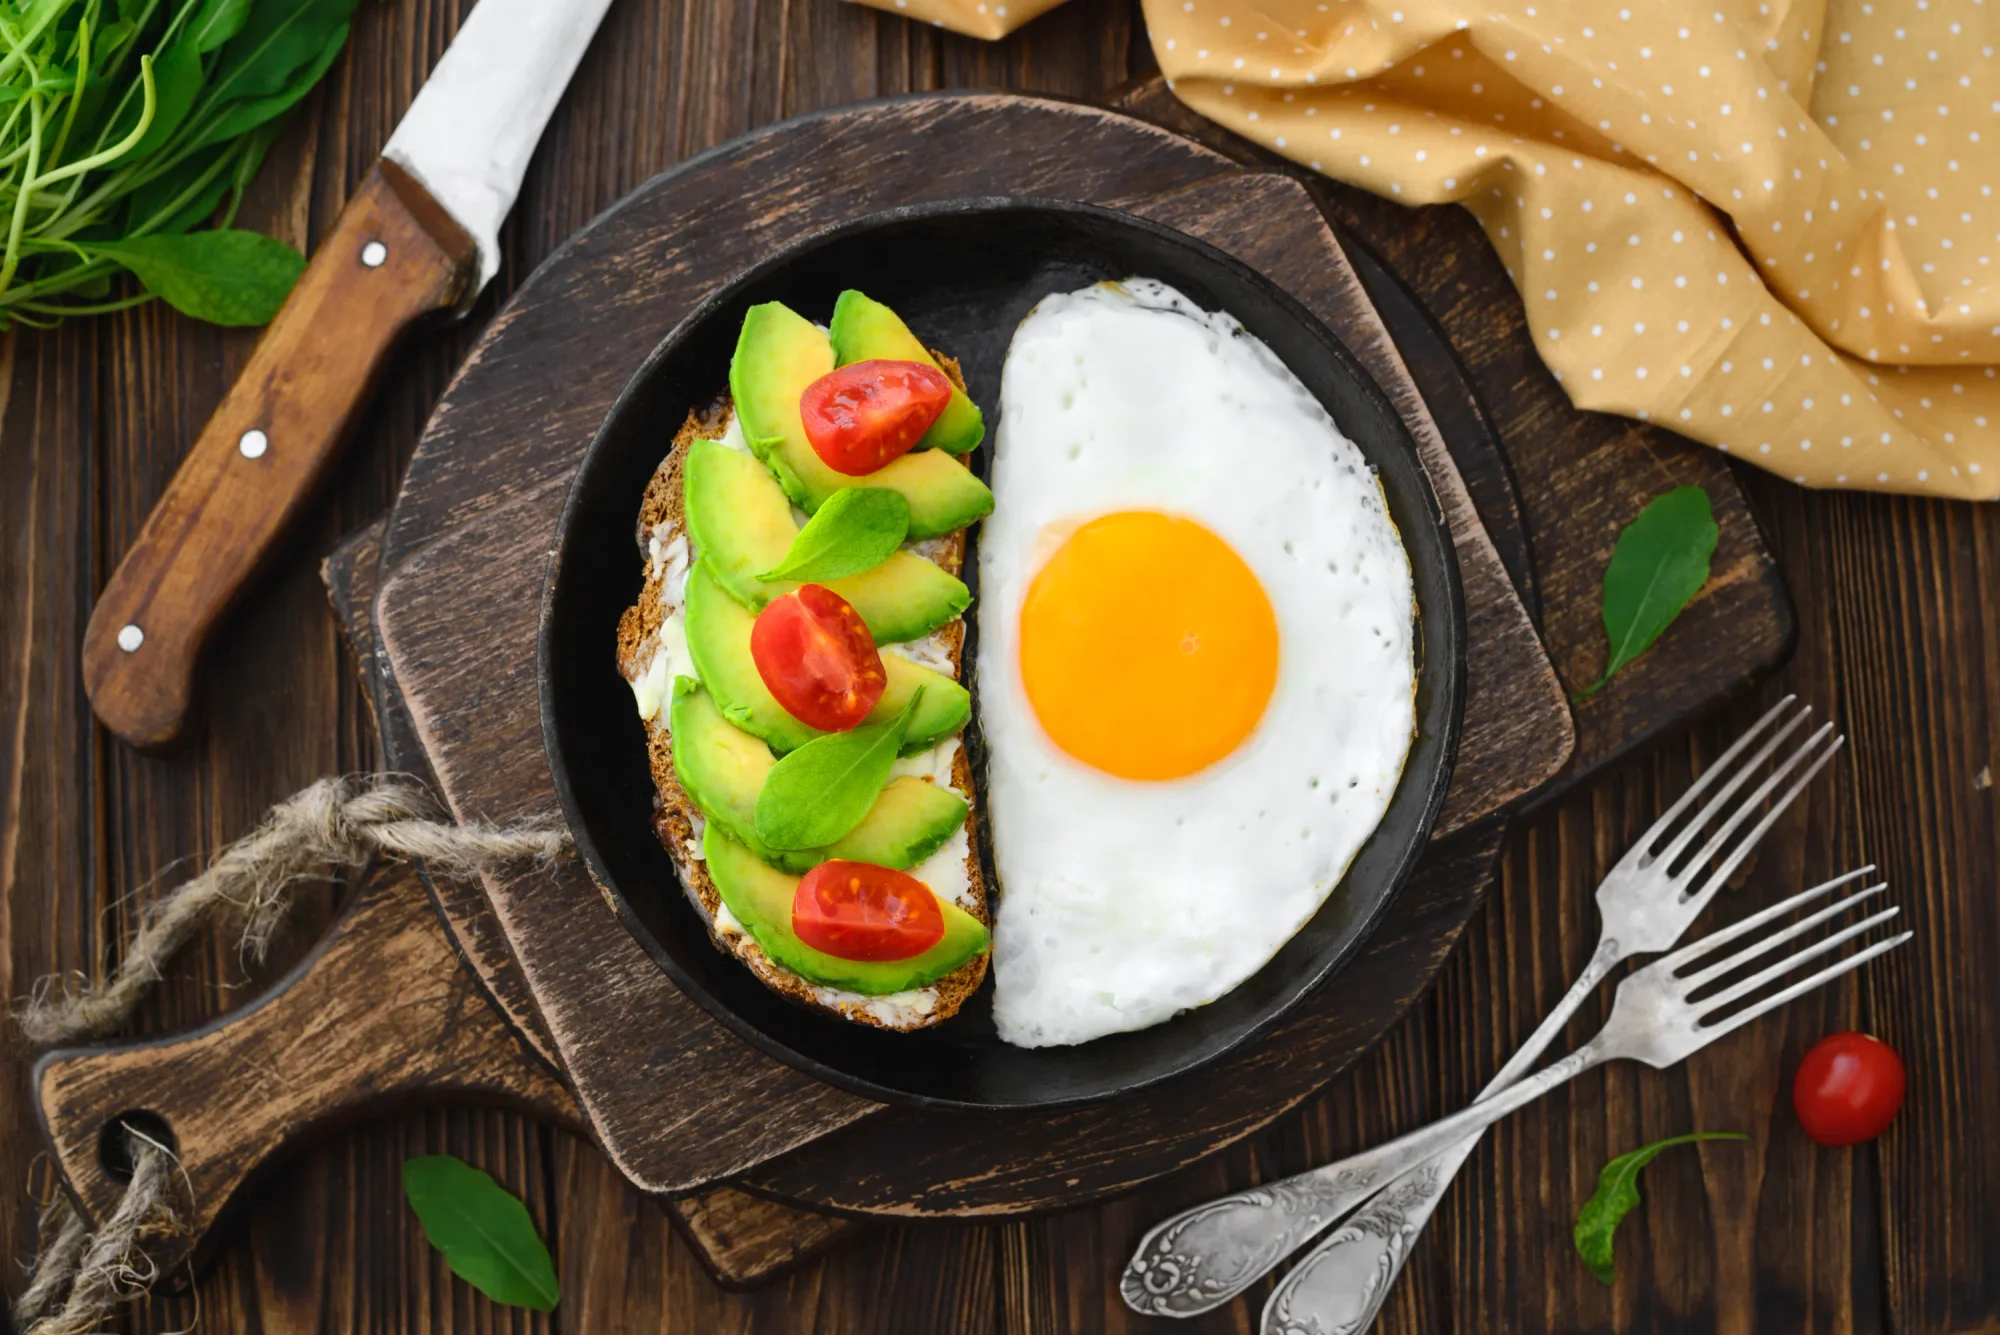 Fried egg in pan alongside avocado toast top view close-up in rustic style on a wooden background, cutting boards, forks, knife, arugula, concept of a healthy lifestyle with a high-fat, high-protein breakfast.